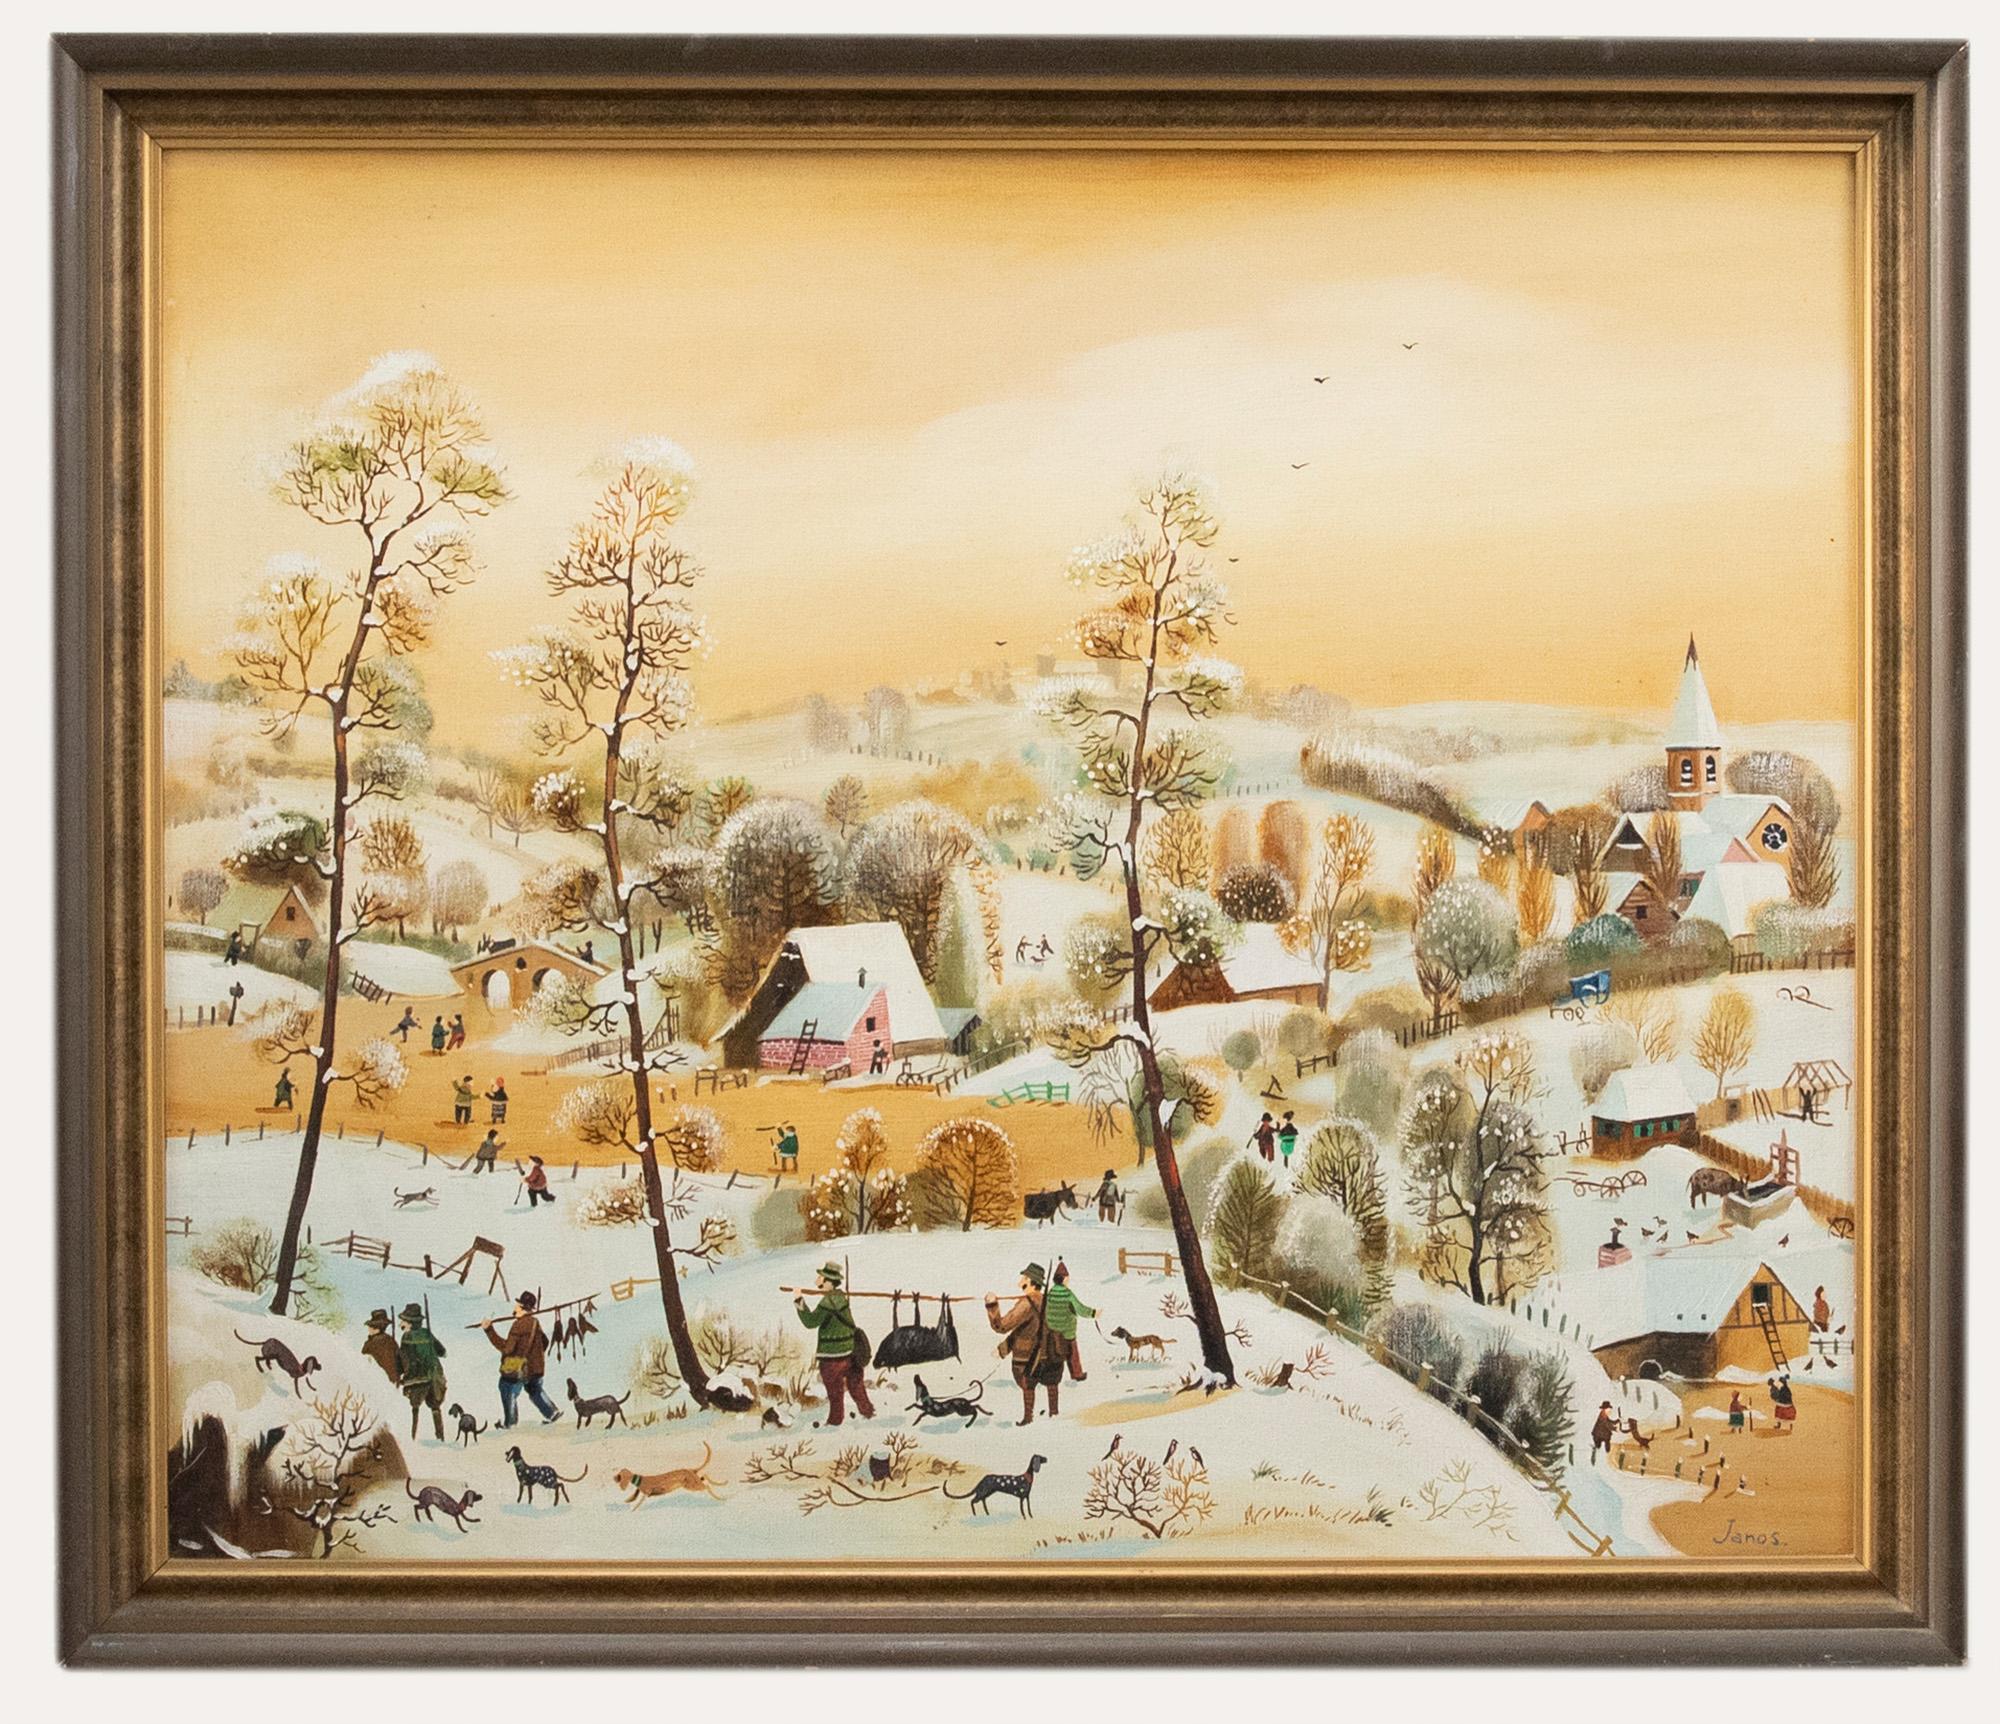 Unknown Landscape Painting - Paul Janos - Framed Contemporary Oil, A Winter Village